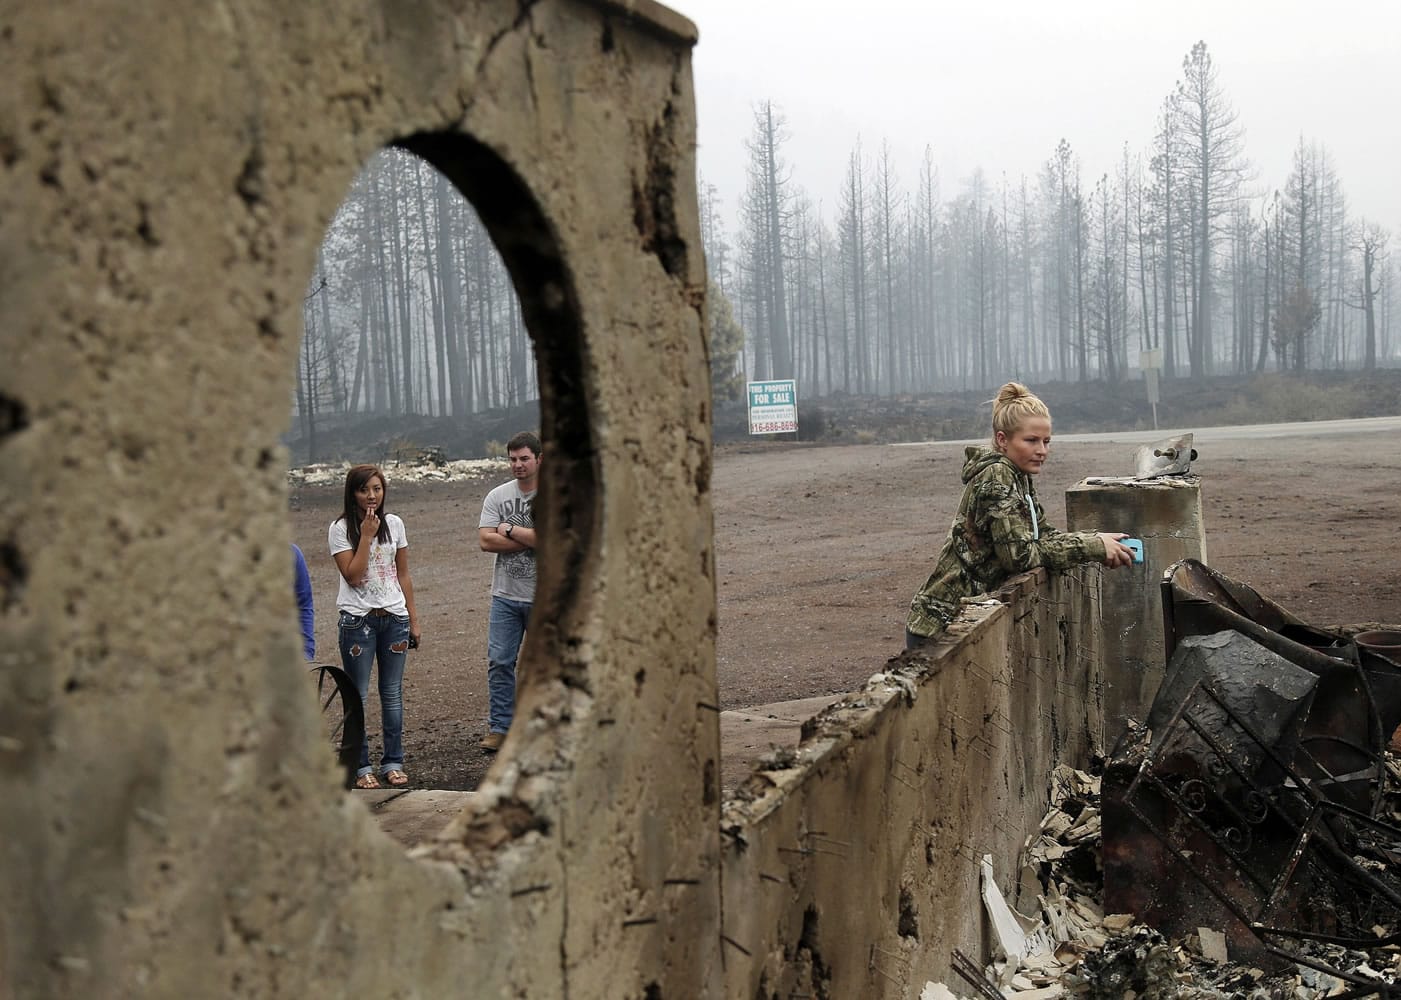 Robyn Garner, right, looks at the fire-ravaged remains of the Fireside Village, a restaurant and shop owned by the Garner family, in the aftermath of the Eiler Fire on Tuesday in Hat Creek, Calif.